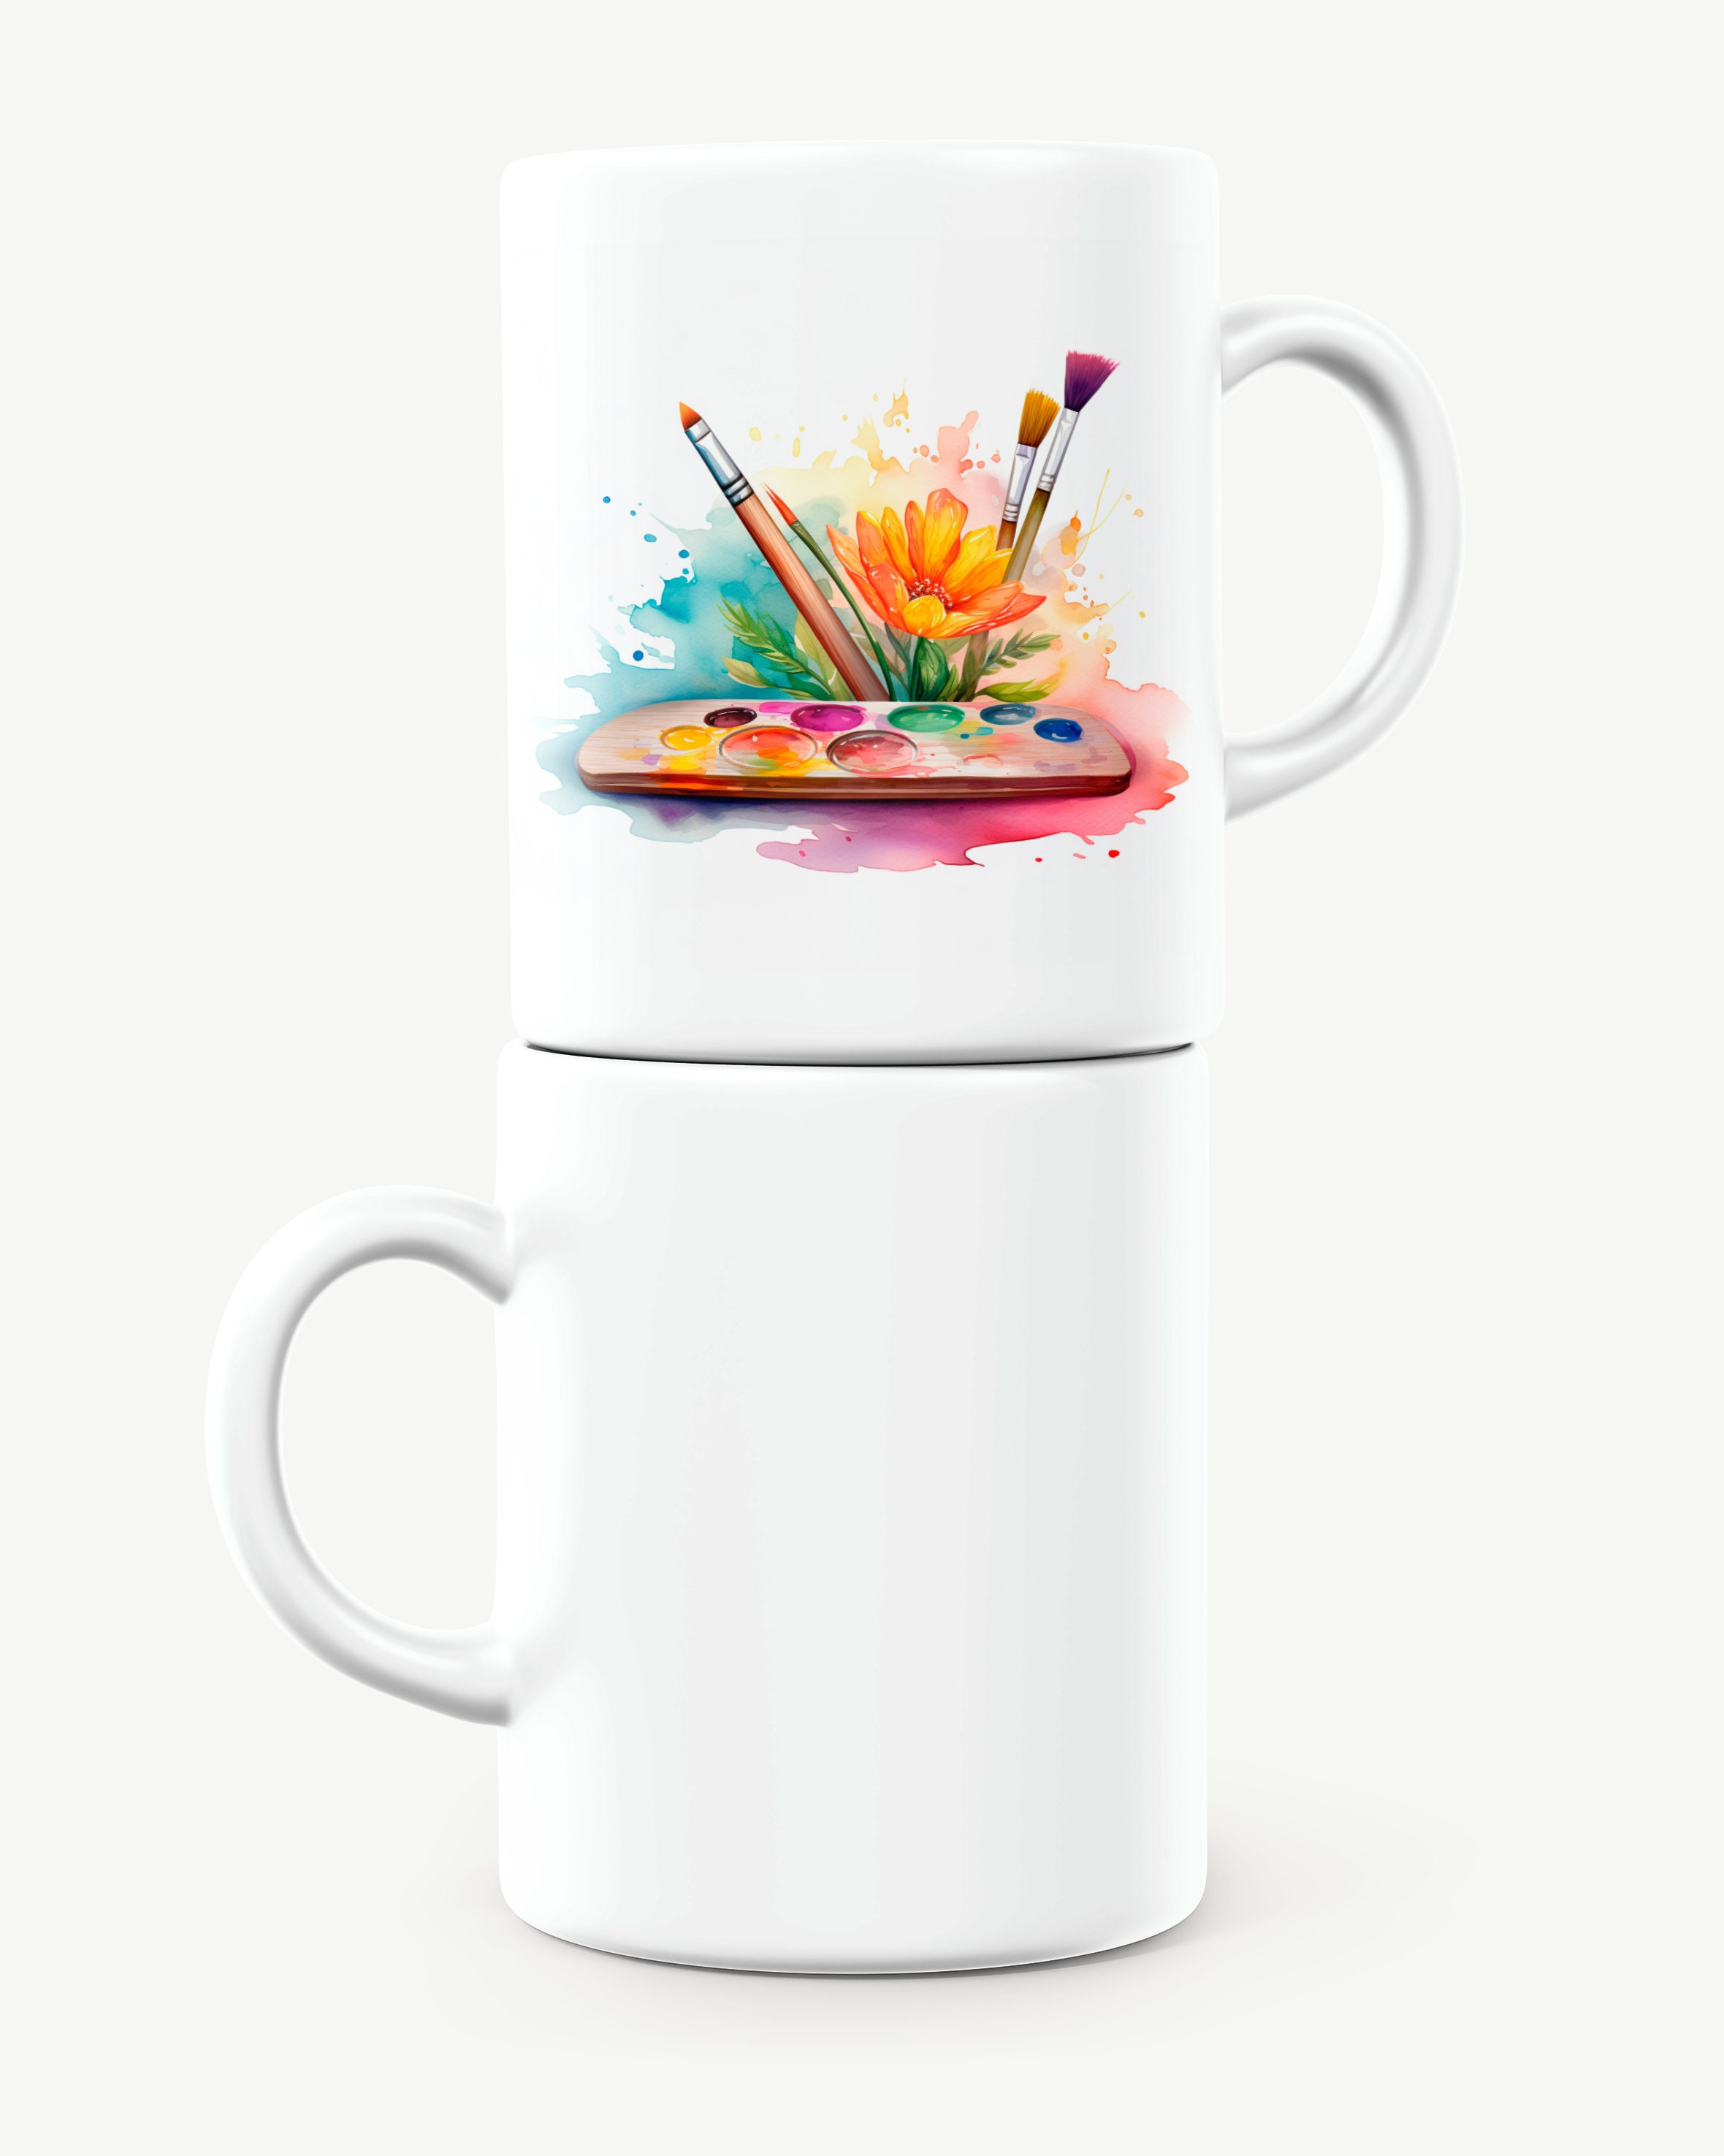 Paint brushes in a cup Coffee Mug by Sezer Akdeniz - Pixels